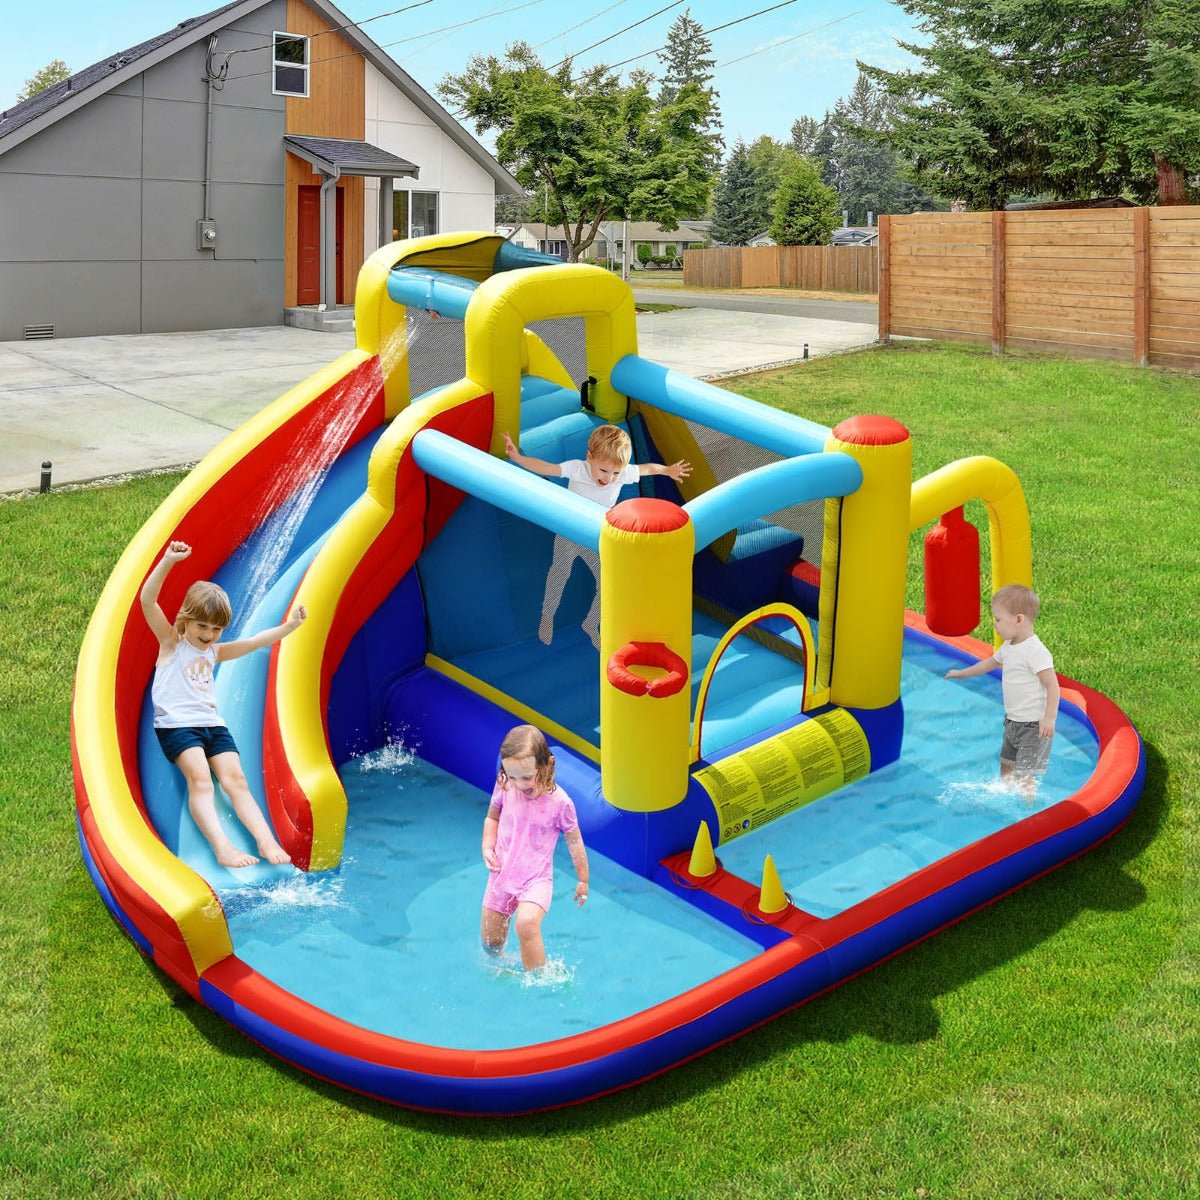 Curved Water Slide and Bounce Castle: Endless Fun Awaits